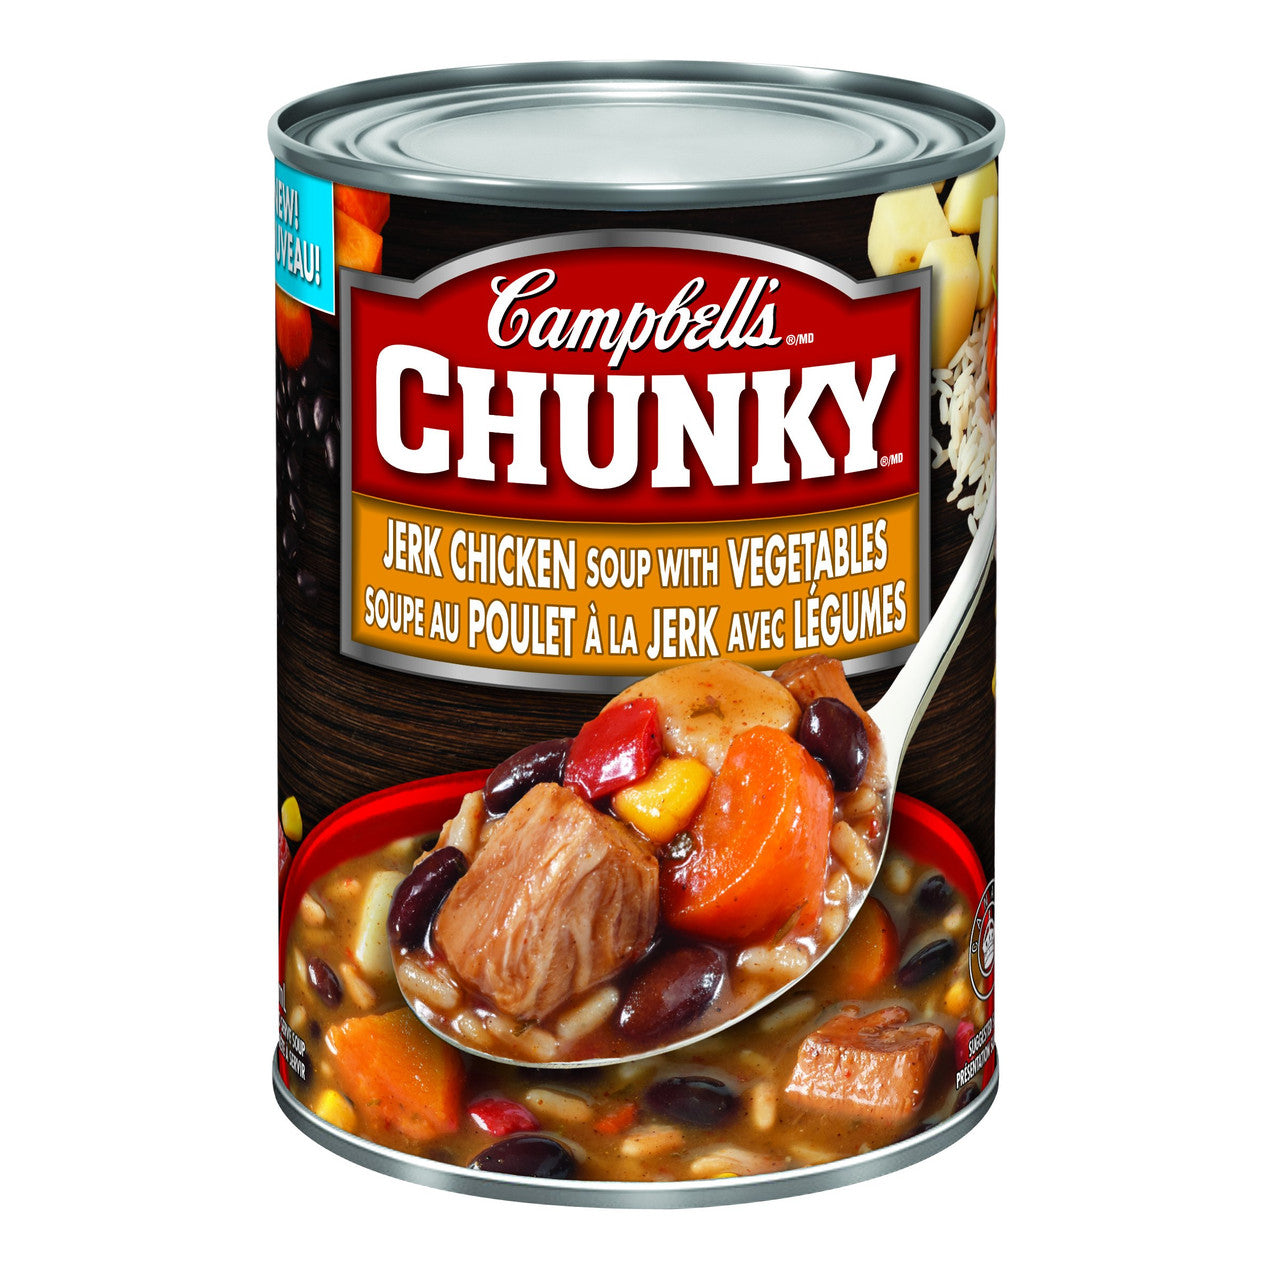 Campbell's Chunky Jerk Chicken Soup with Vegetables 540ml/18.25oz, (Imported from Canada)